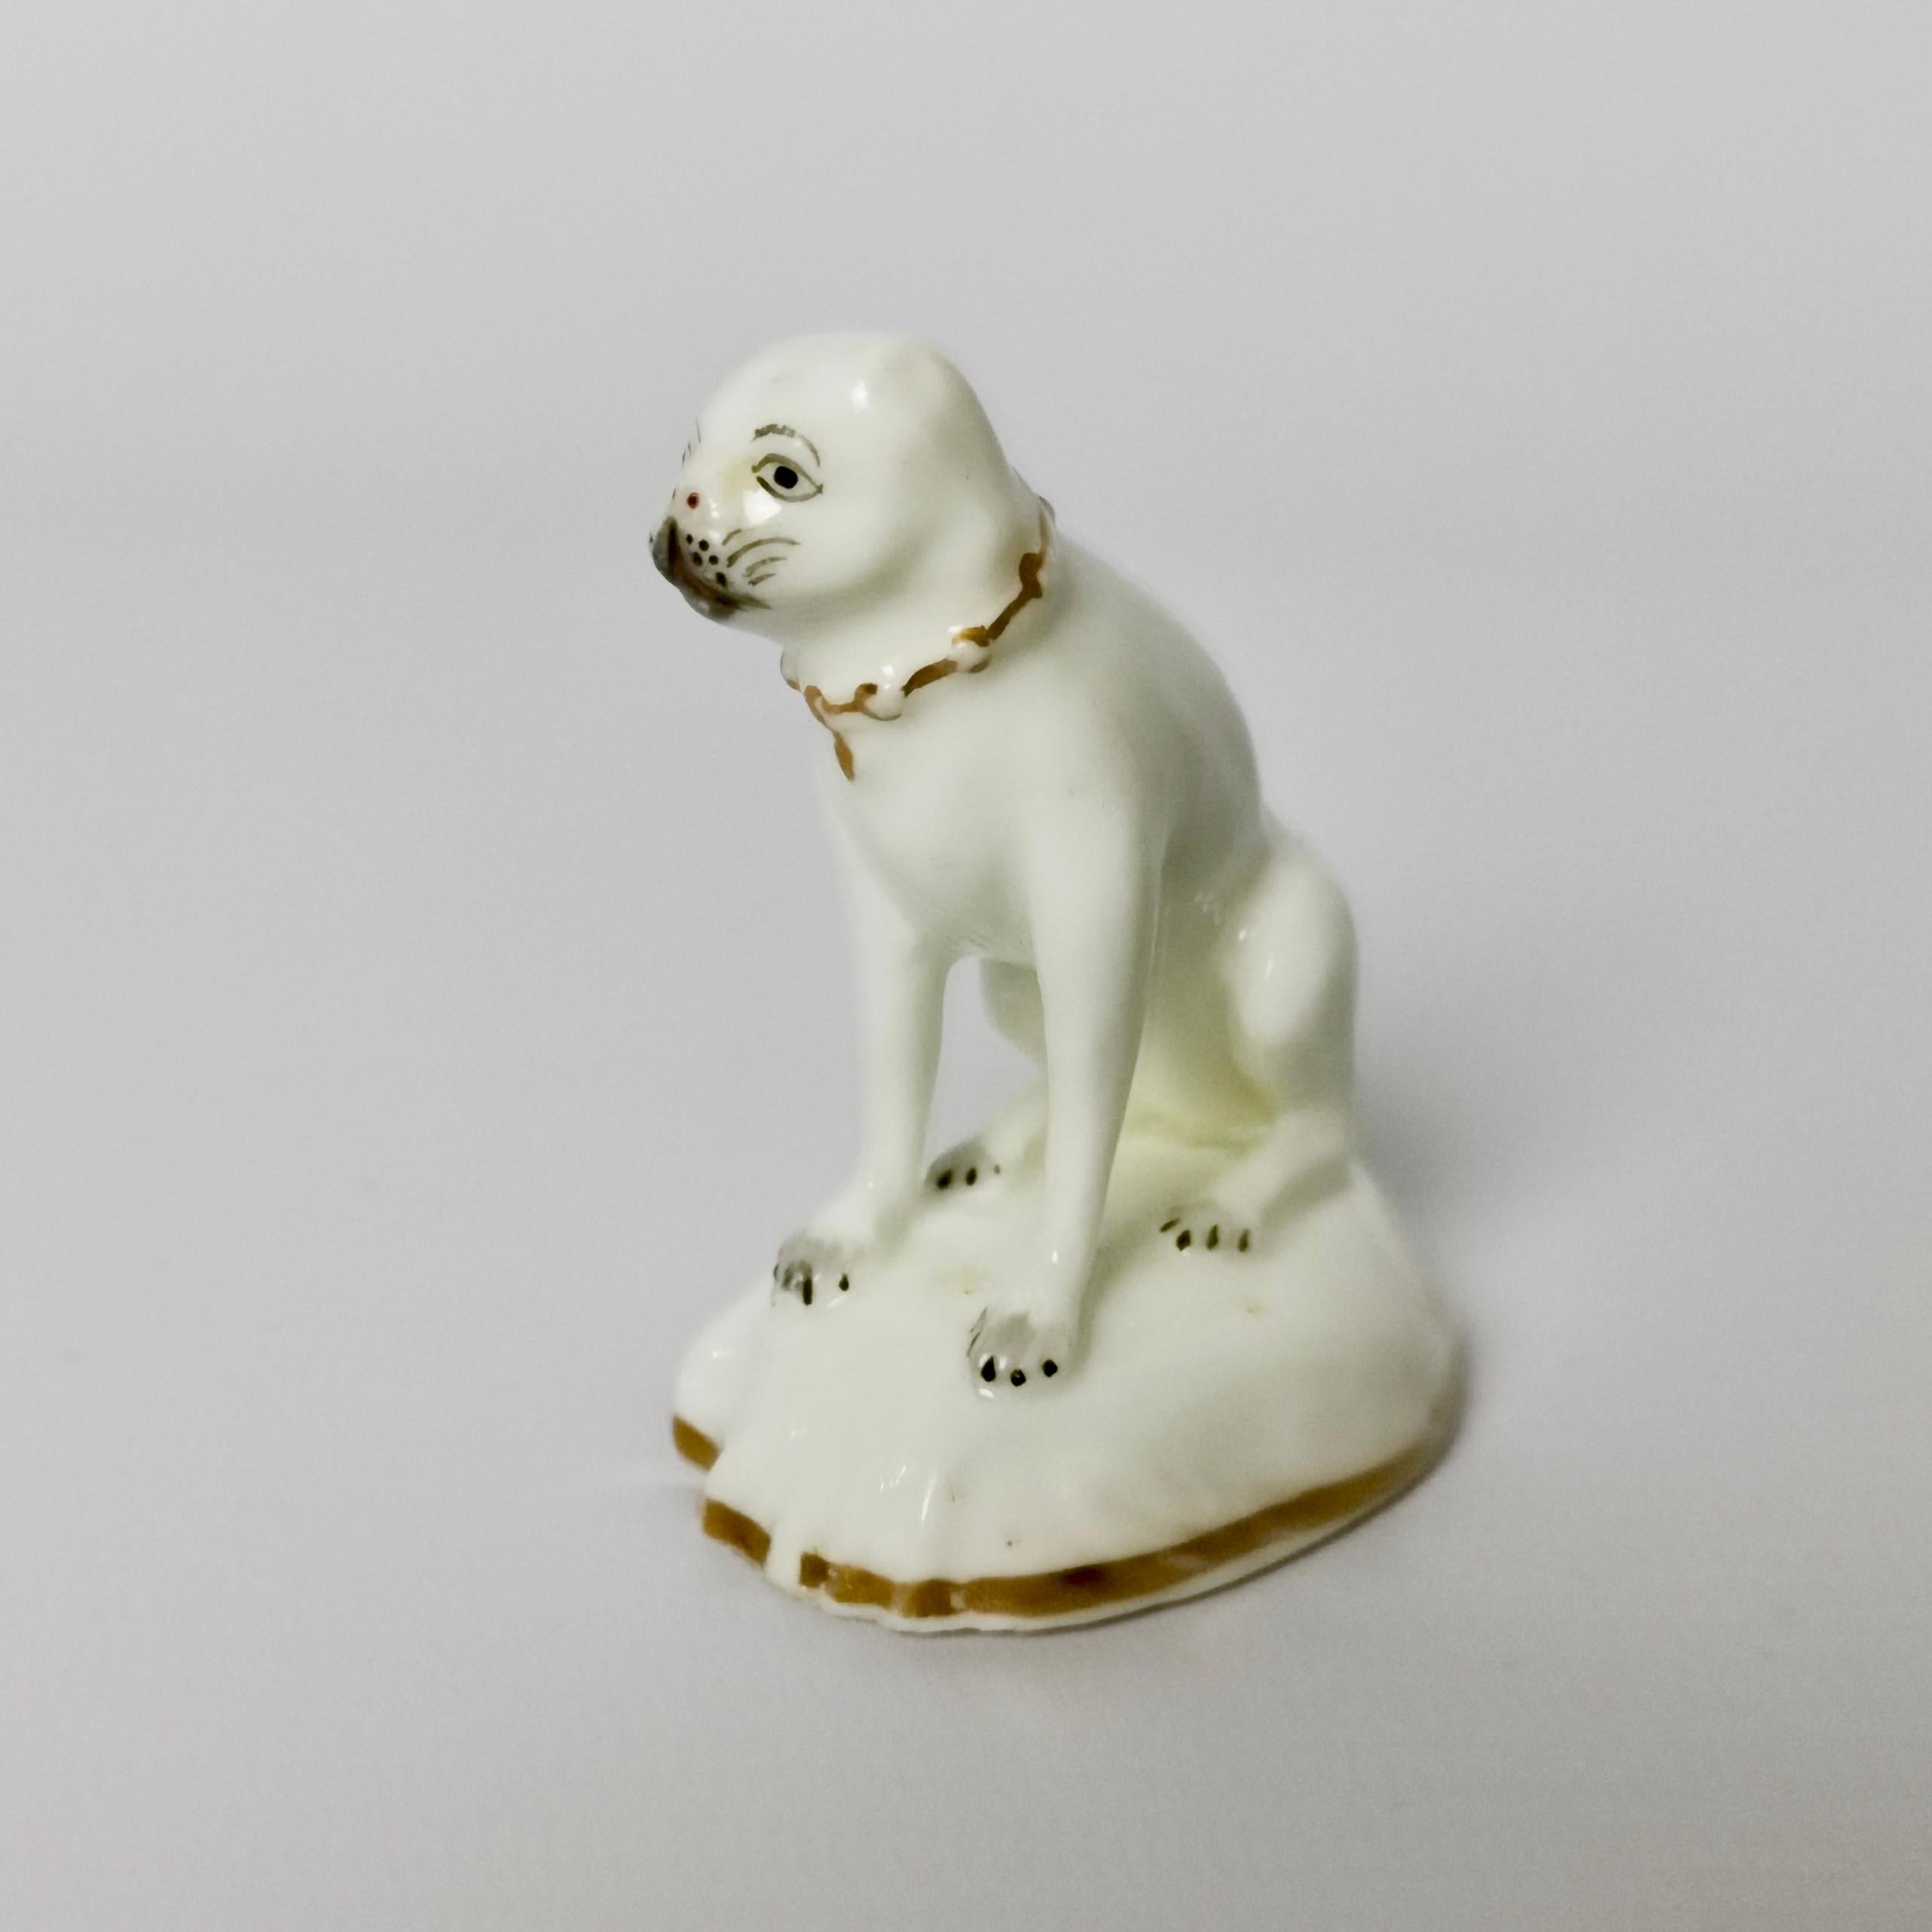 This is a very charming porcelain pug dog made by Rockingham in about 1835.

This tiny dog would make a perfect Valentine's Day gift!

Although the Rockingham pottery started some time in the mid-18th century, when we say 